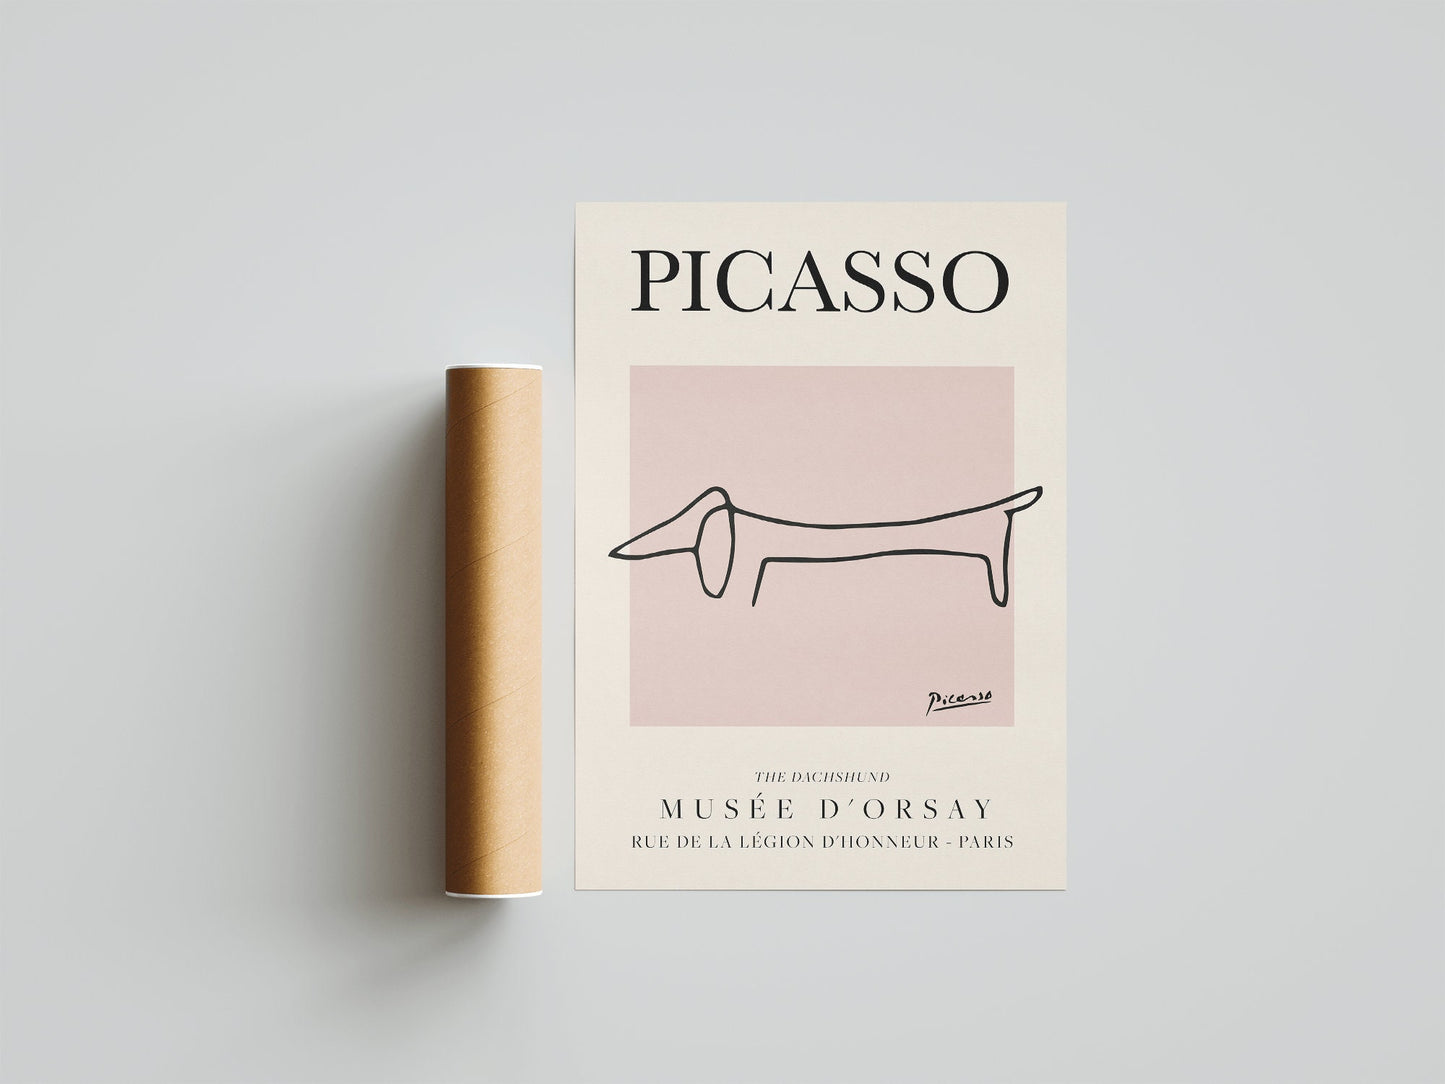 Picasso - Dog, Exhibition Vintage Line Art Poster, Minimalist Line Drawing, Ideal Home Decor or Gift Print